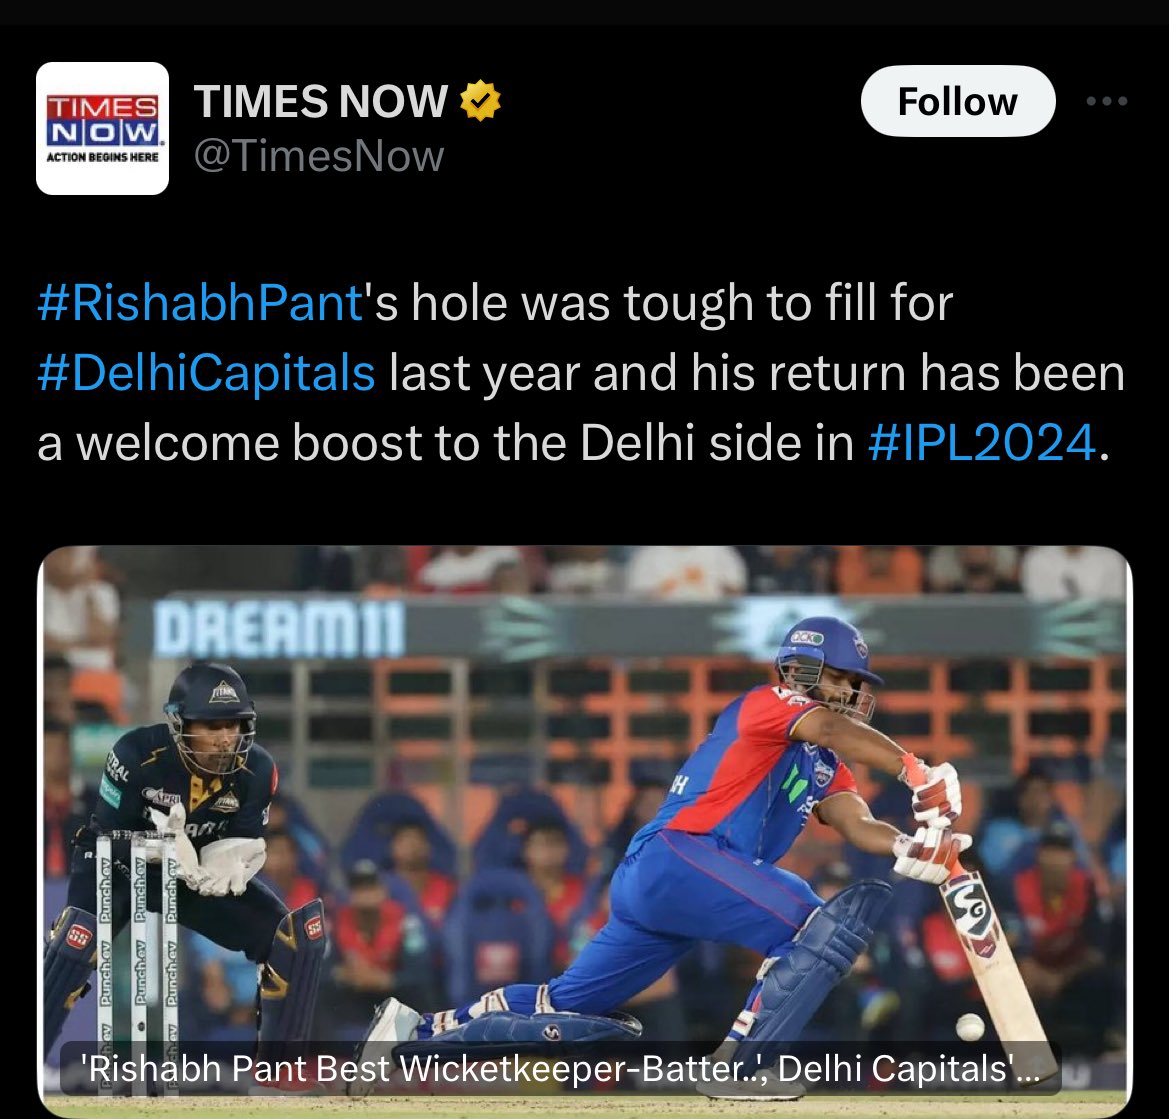 But, why were they trying to fill the “HOLE” of #RishabhPant ??